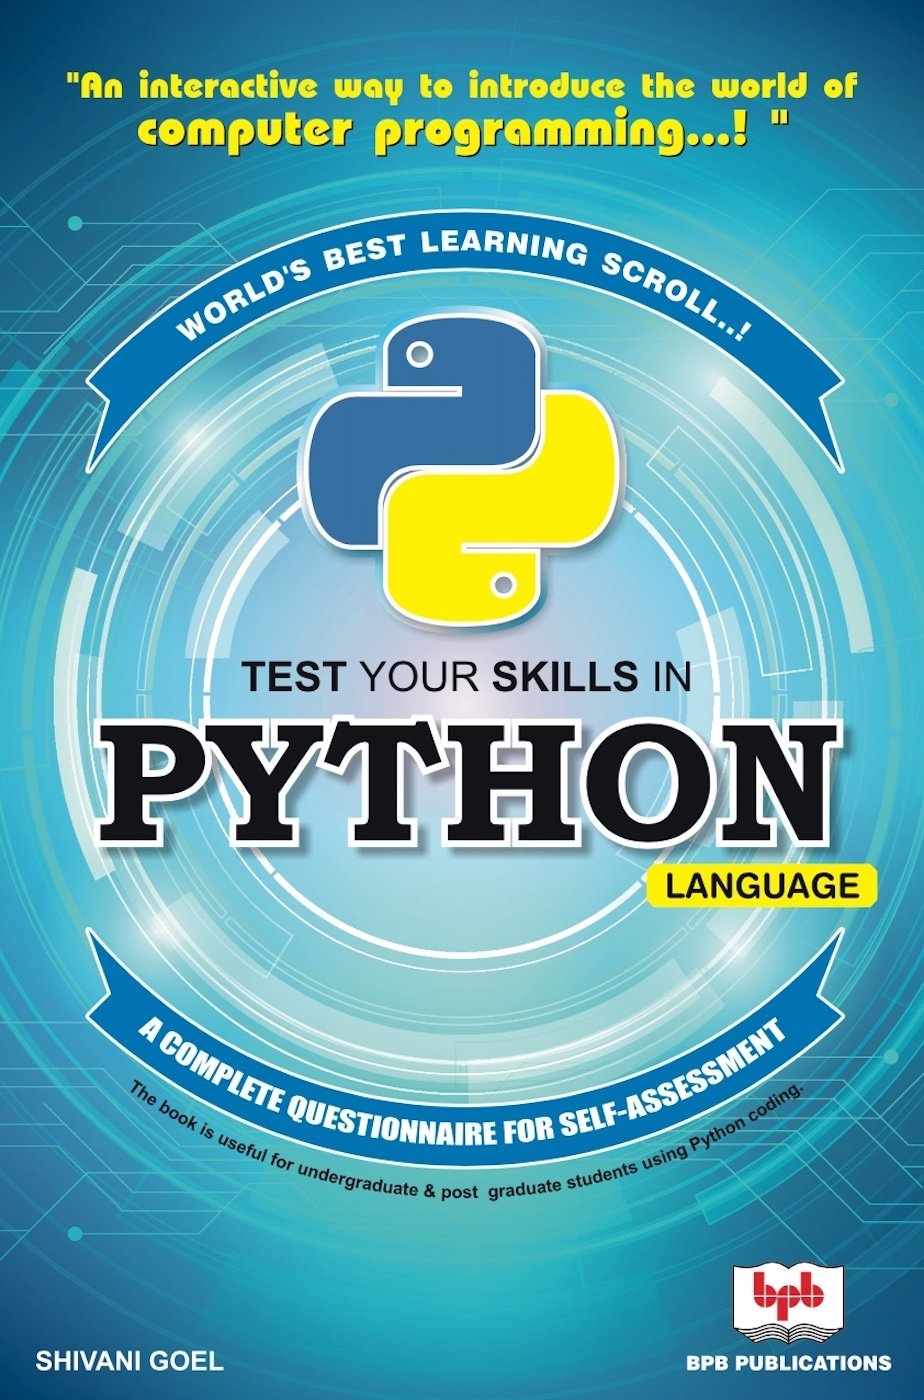 Test your skills in Python Language: A complete questionnaire for self-assessment